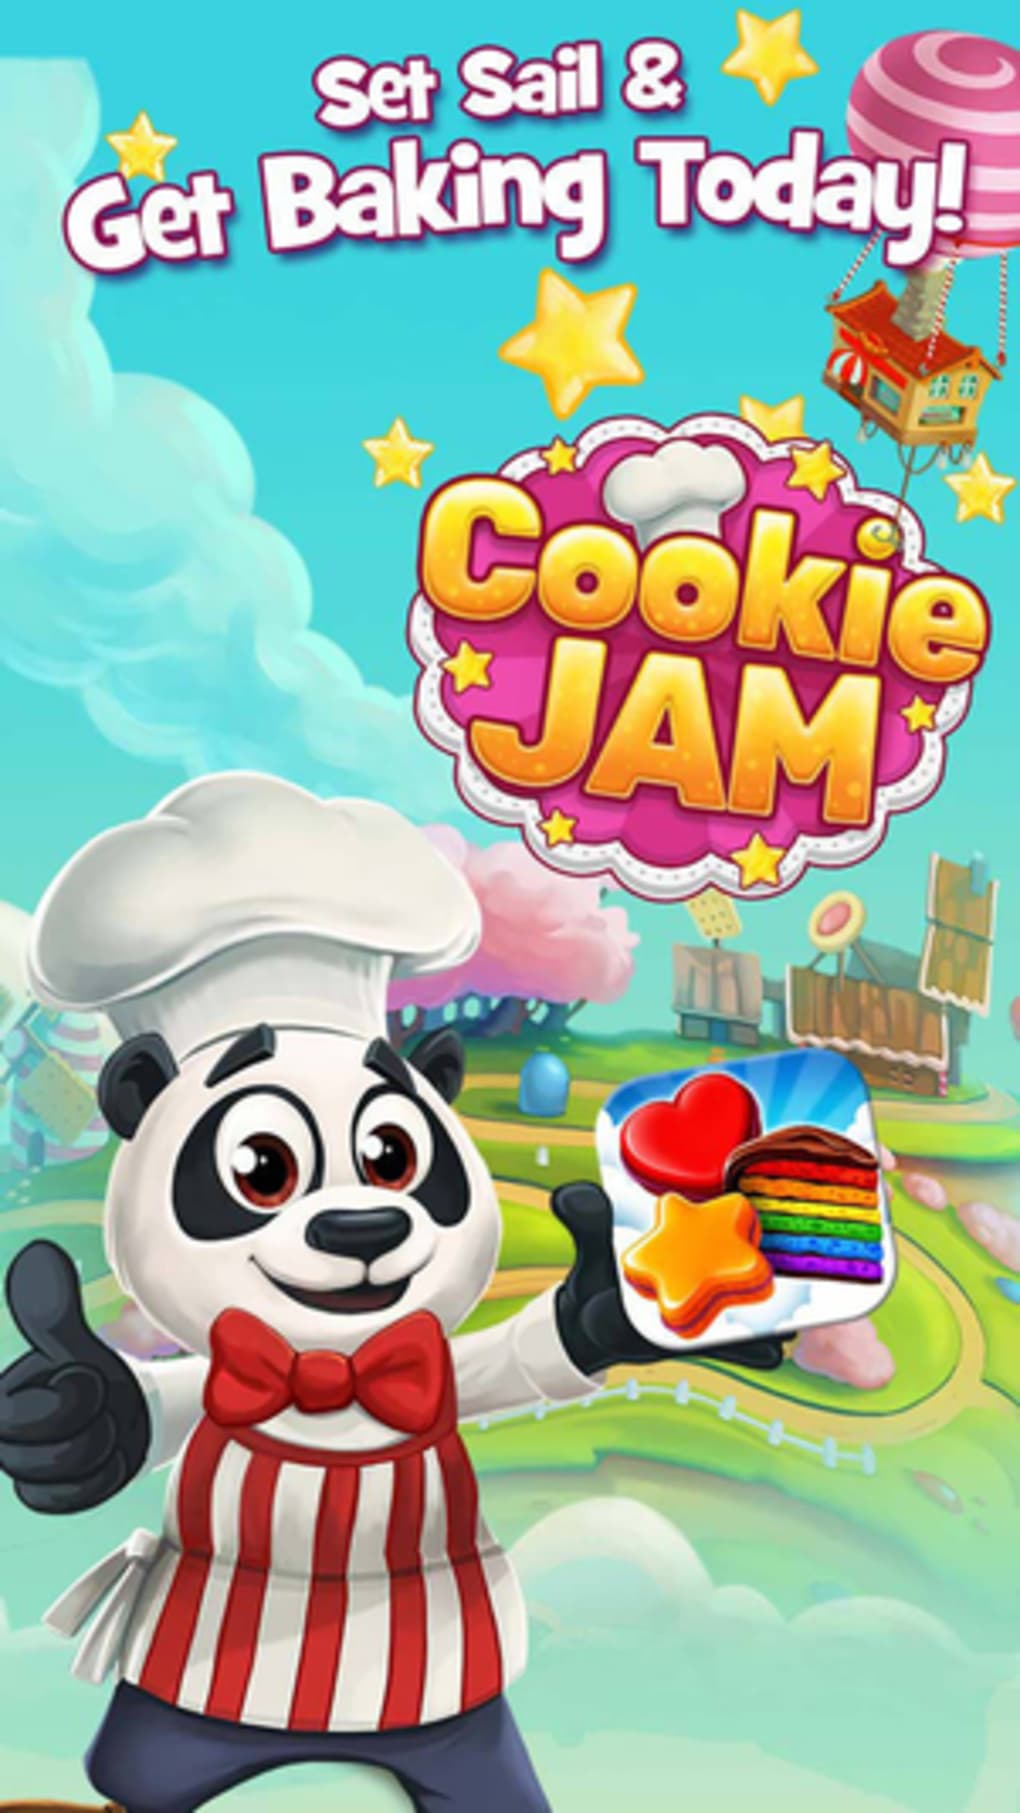 48 Top Photos Cookie Jam App Problems / Cookie Jam Blast New Match 3 Game Swap Candy By Jam City Inc More Detailed Information Than App Store Google Play By Appgrooves Puzzle Games 9 Similar Apps 6 Review Highlights 437 126 Reviews